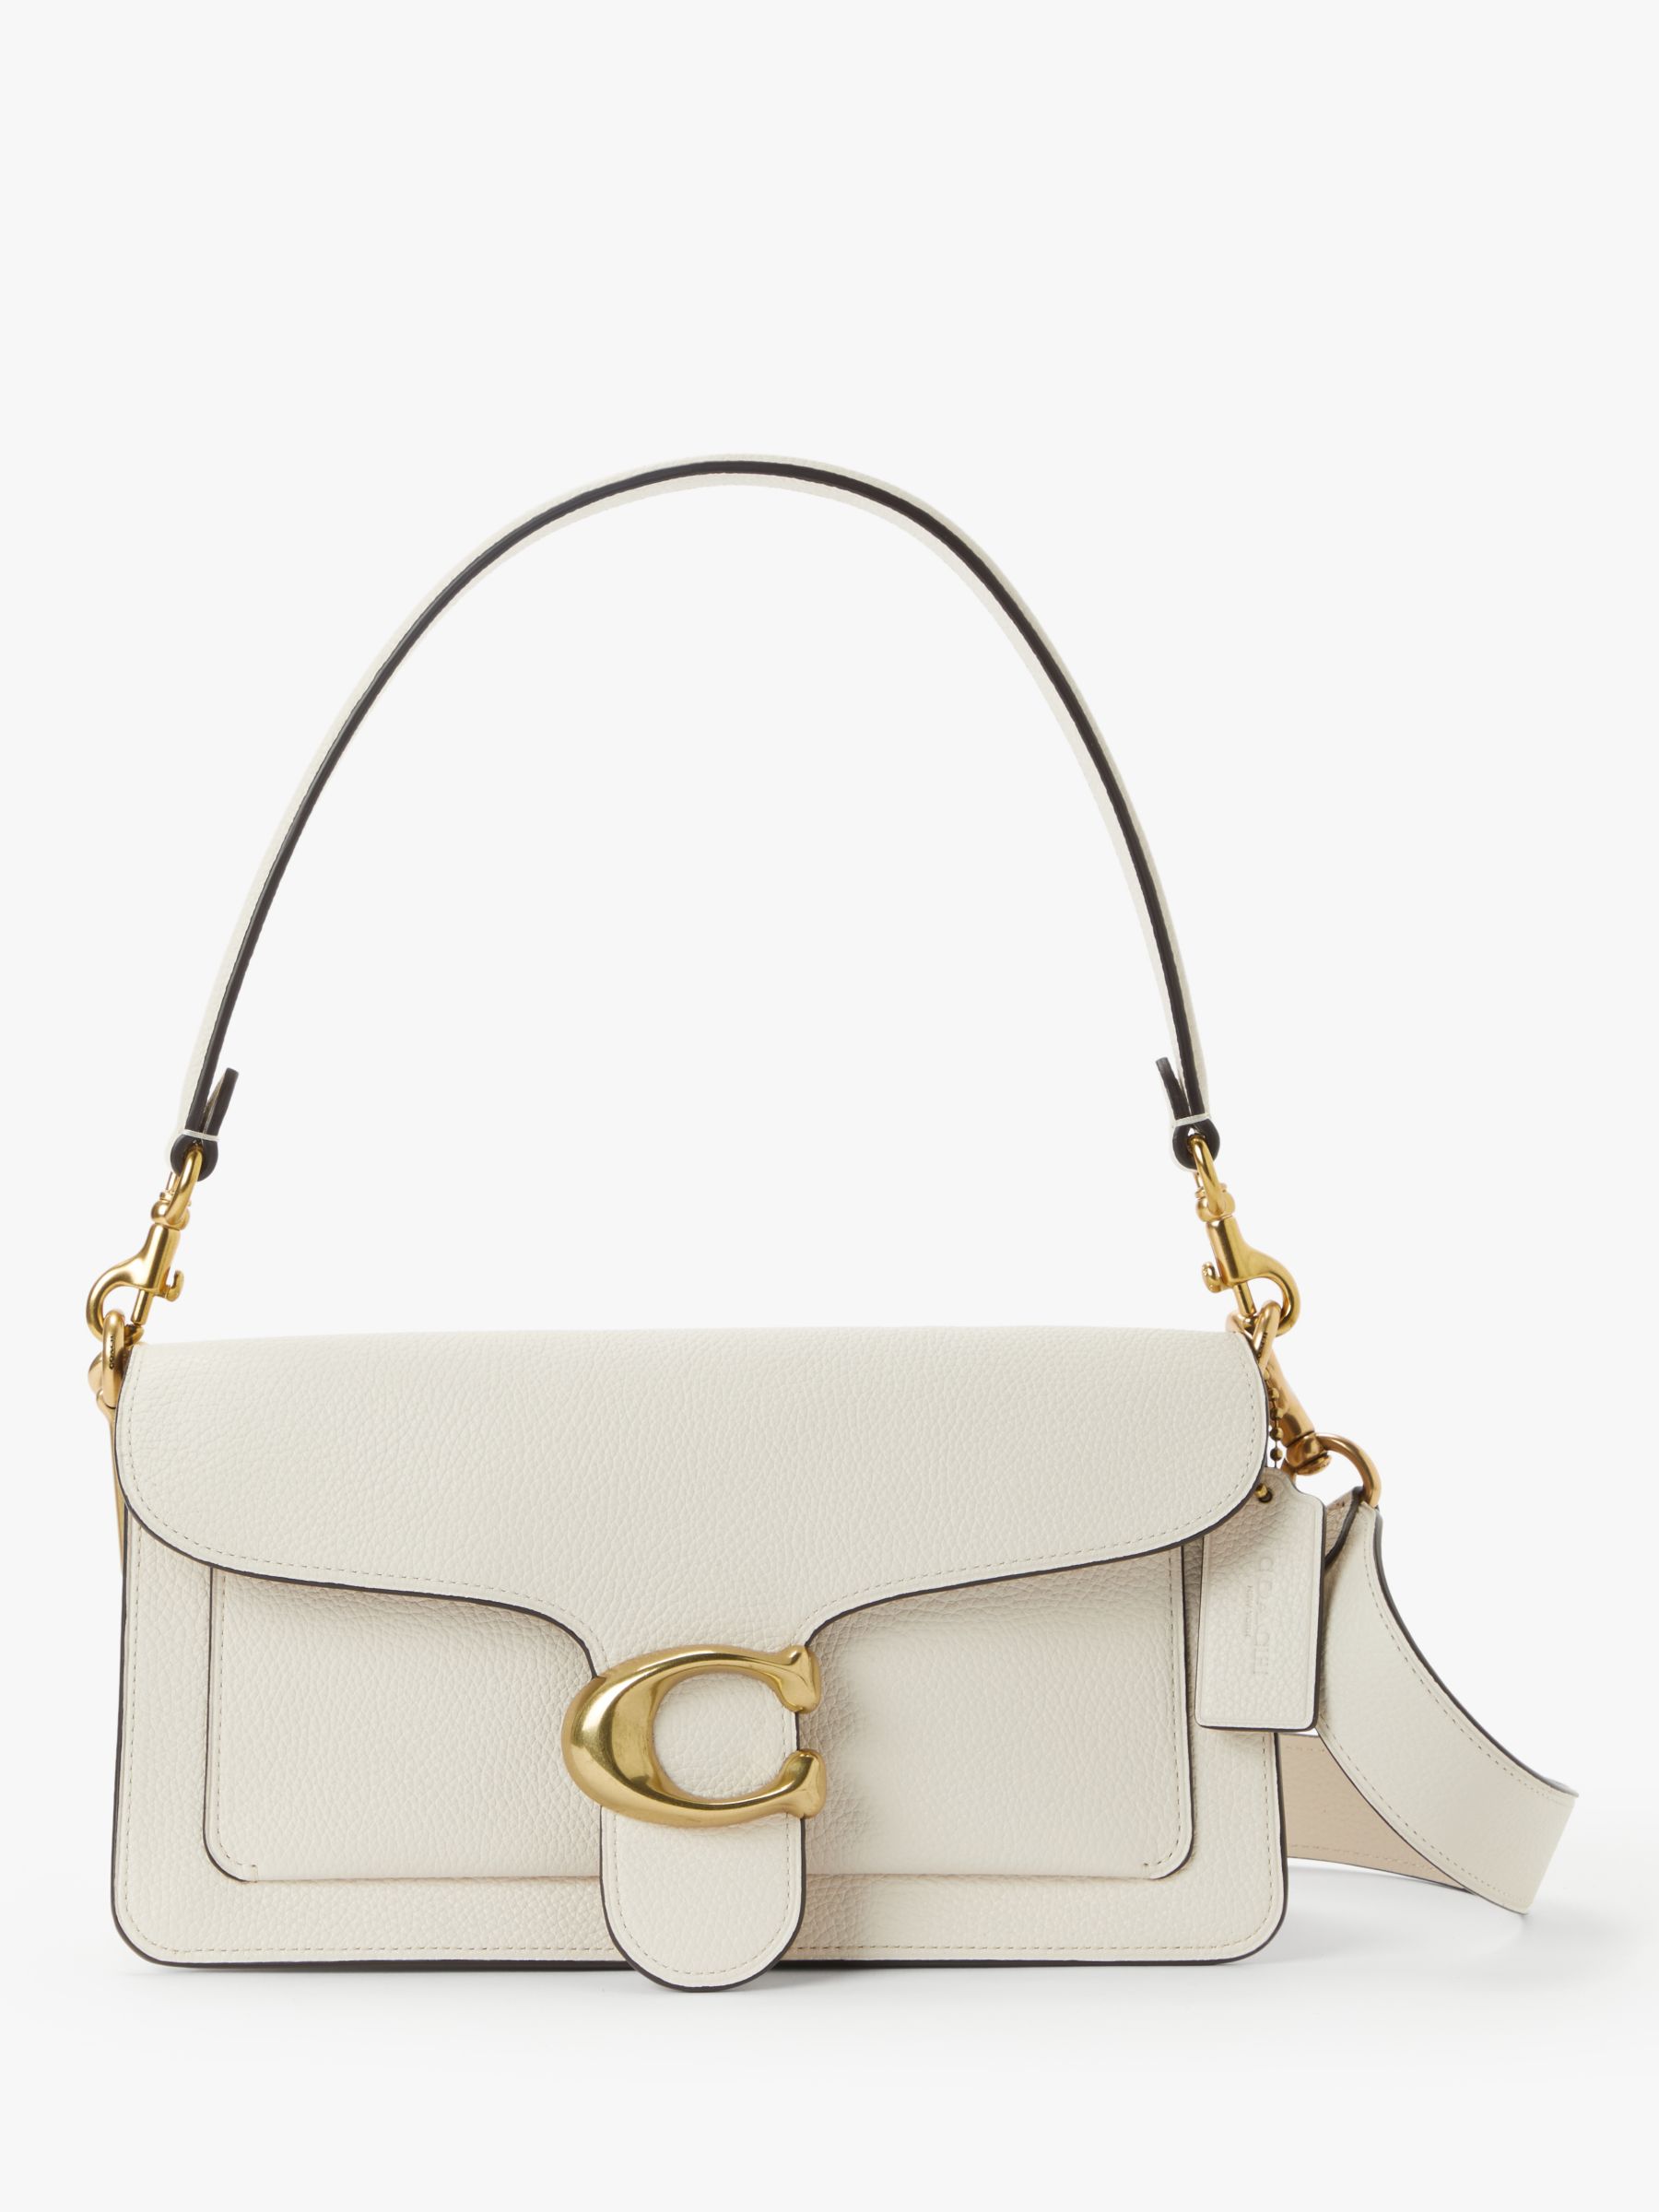 Coach Tabby 26 Leather Shoulder Bag at John Lewis & Partners